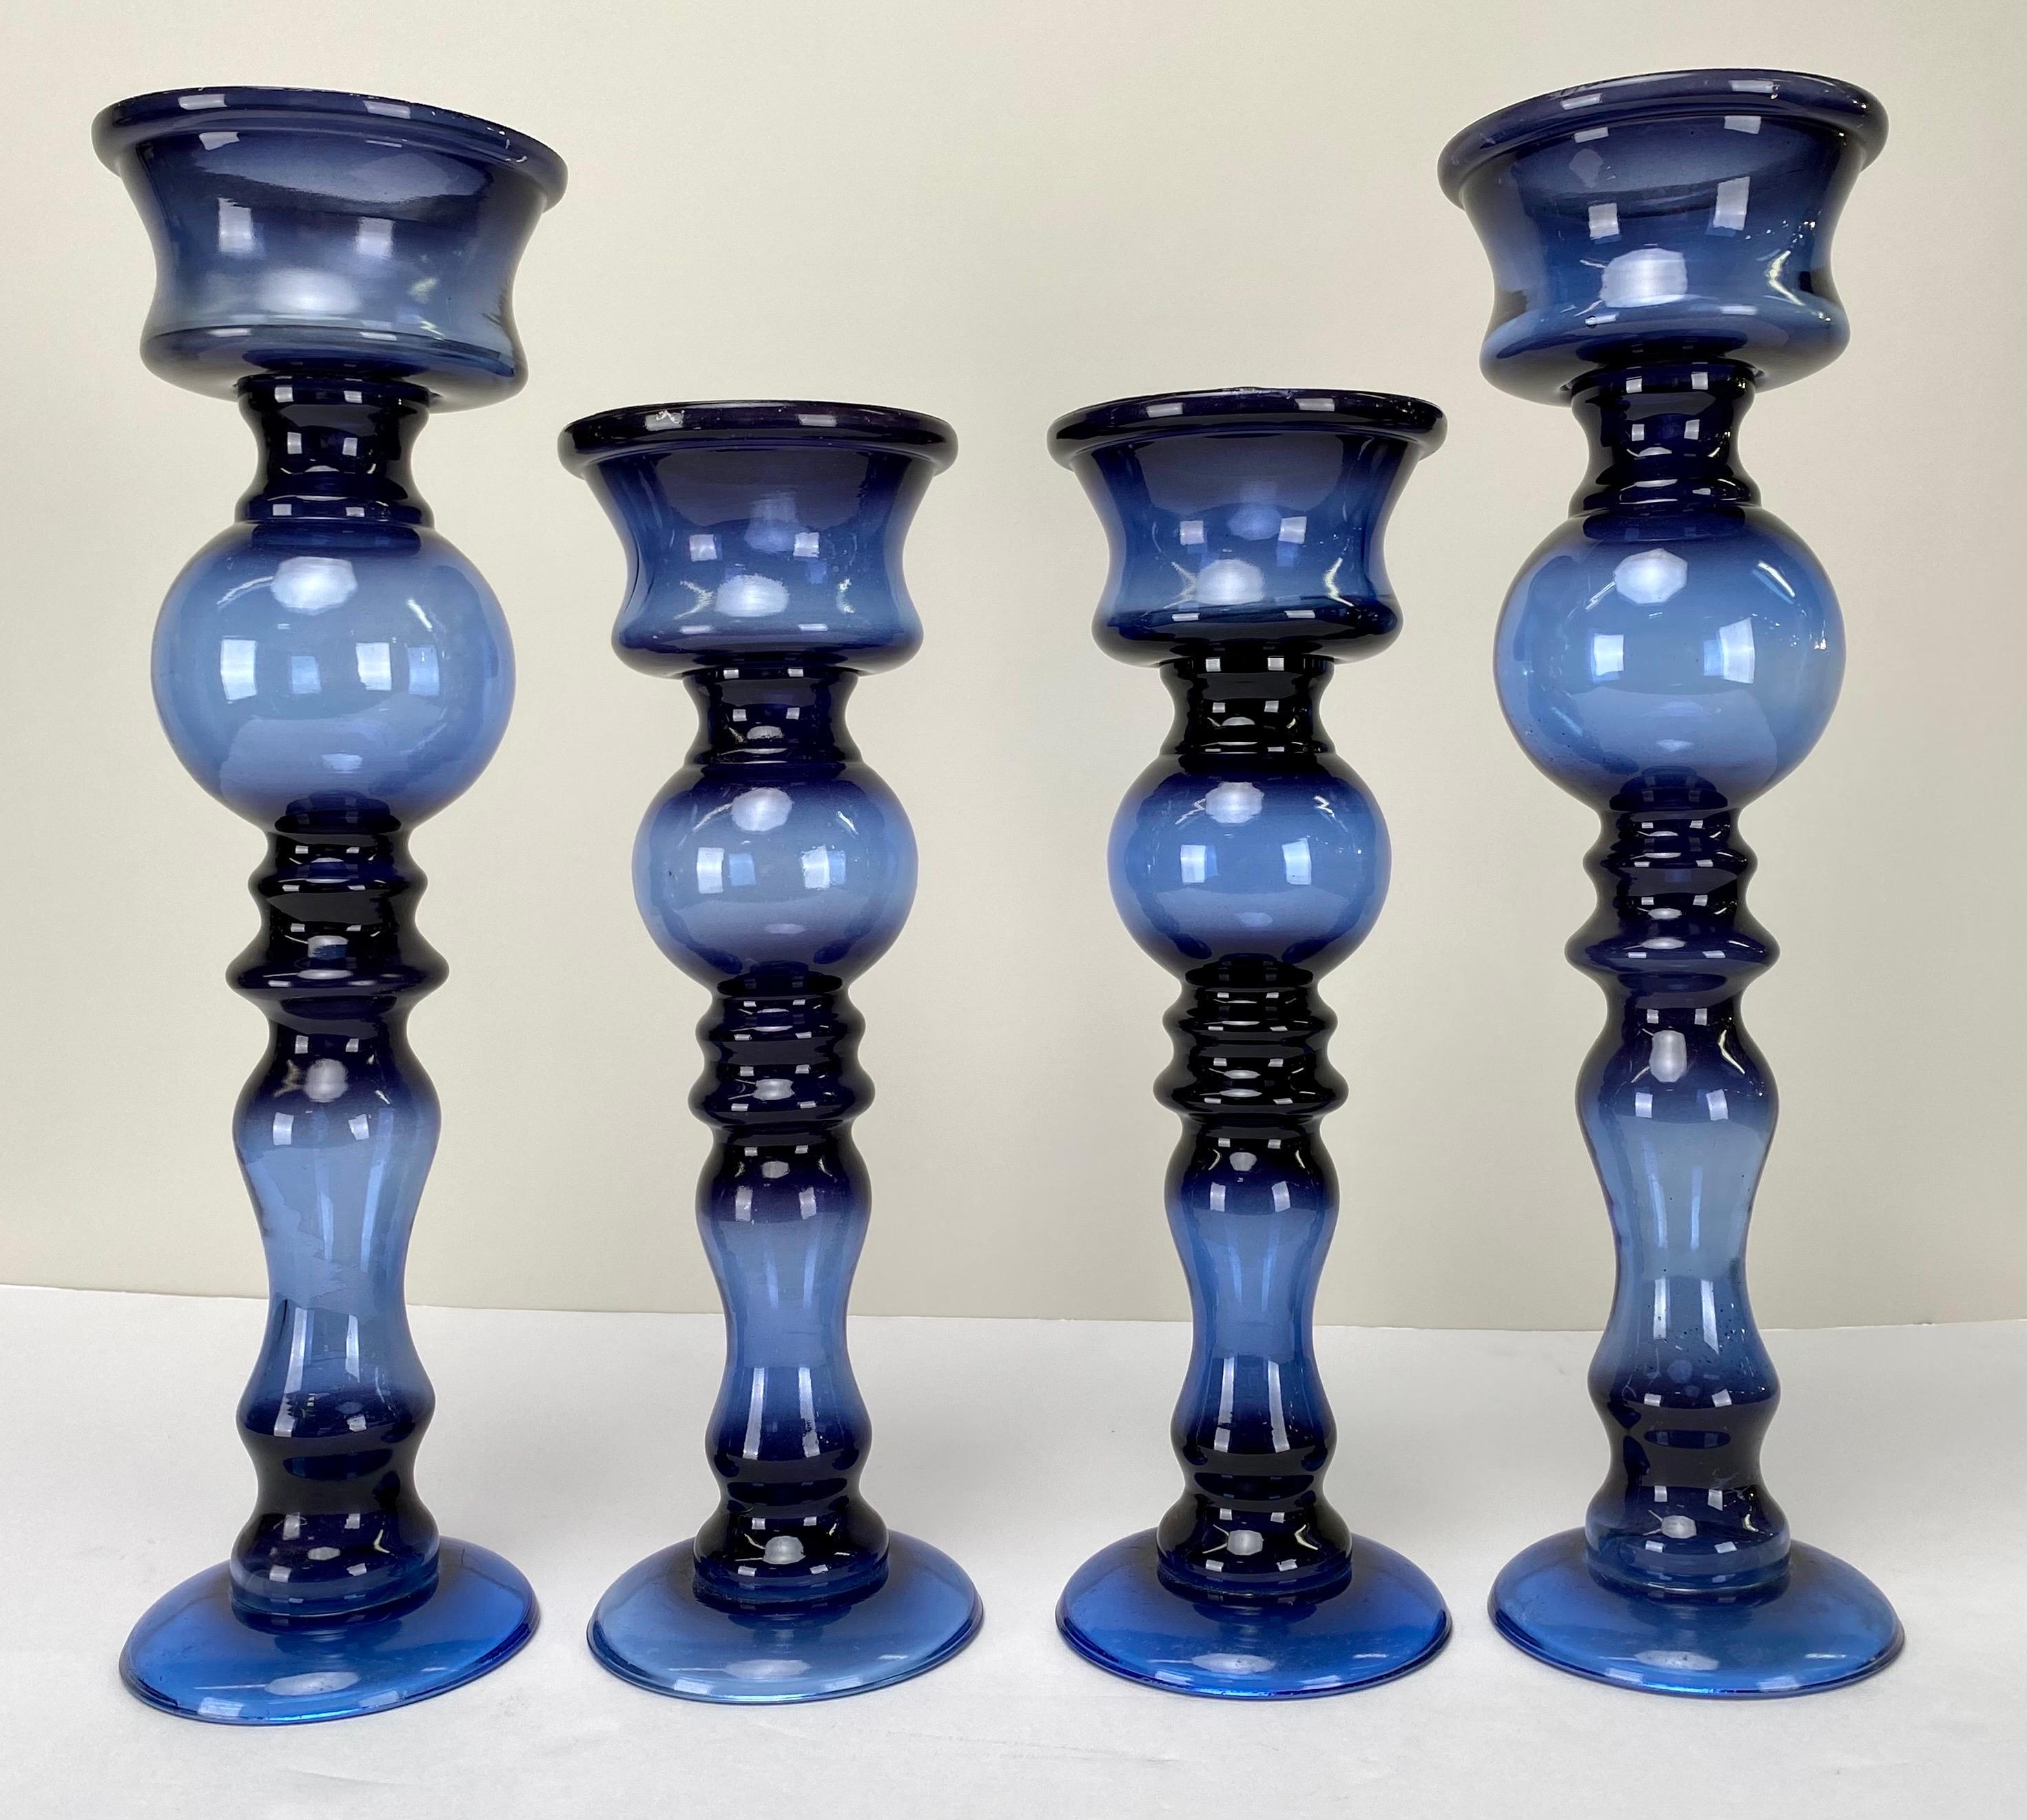 A set of four Art Deco-inspired Blue Candle Holders, bathed in a rich, dark blue hue. This enchanting set comprises two grandiose candle holders alongside two smaller counterparts. Each piece boasts a stem adorned with artfully arranged bubbles,